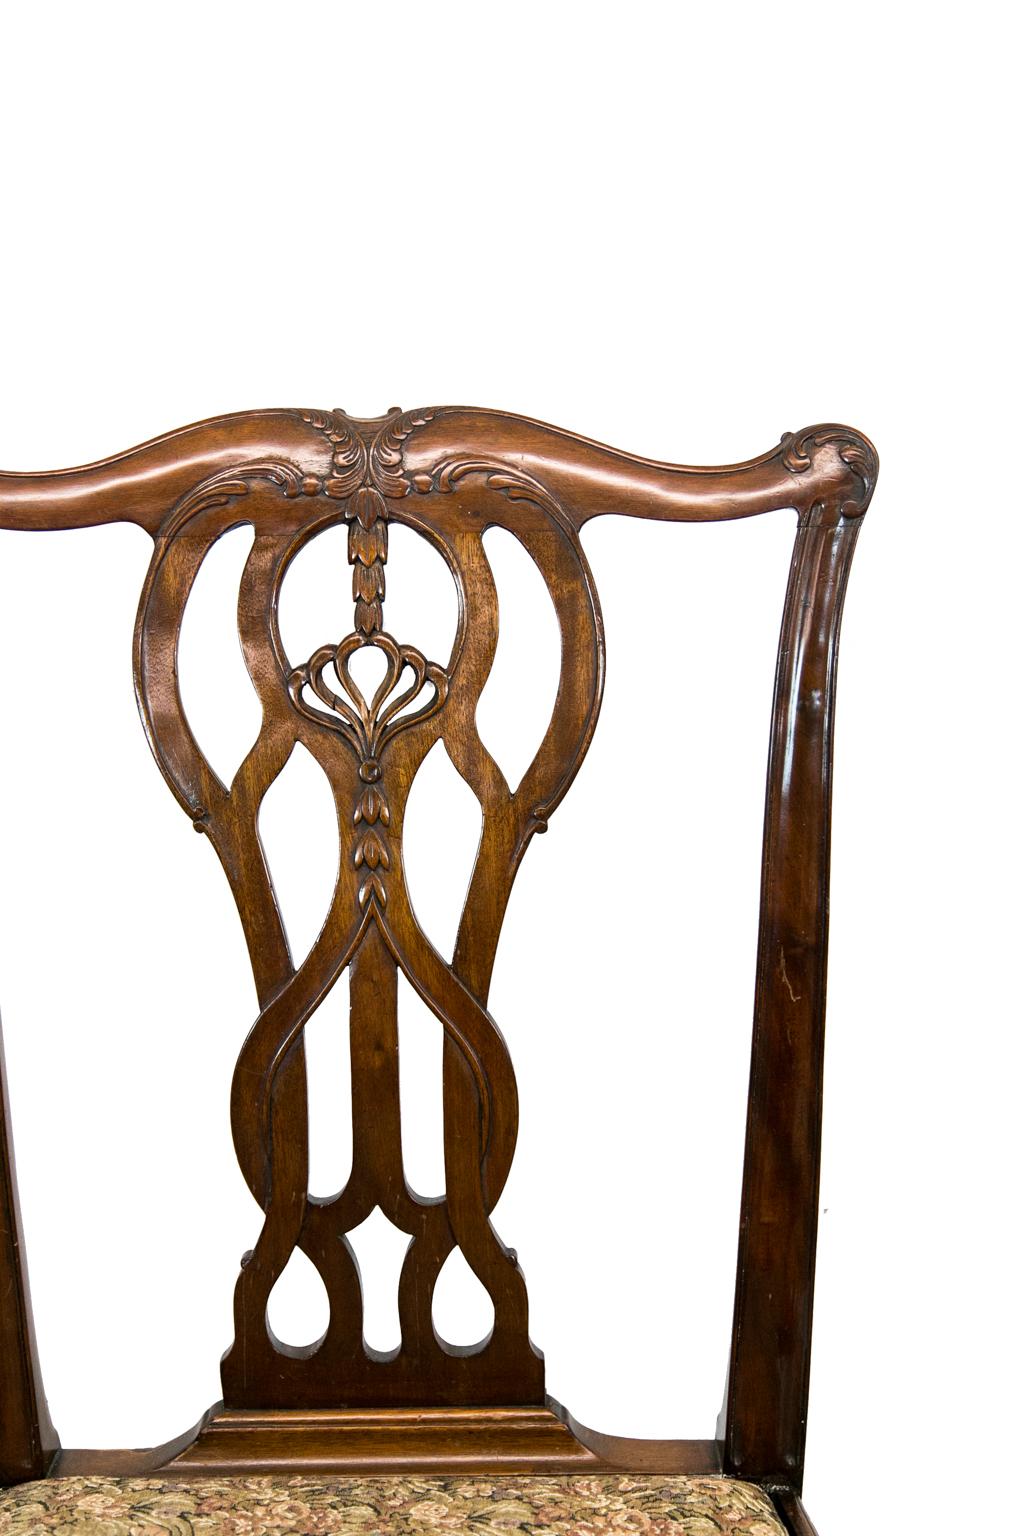 Set of eight Chippendale style chairs, with two arms and six sides. They are carved with interlaced splats with graduated bell flower carvings in a stylized acanthus leaf crest. The legs are carved with acanthus leaf and terminate in ball and claw